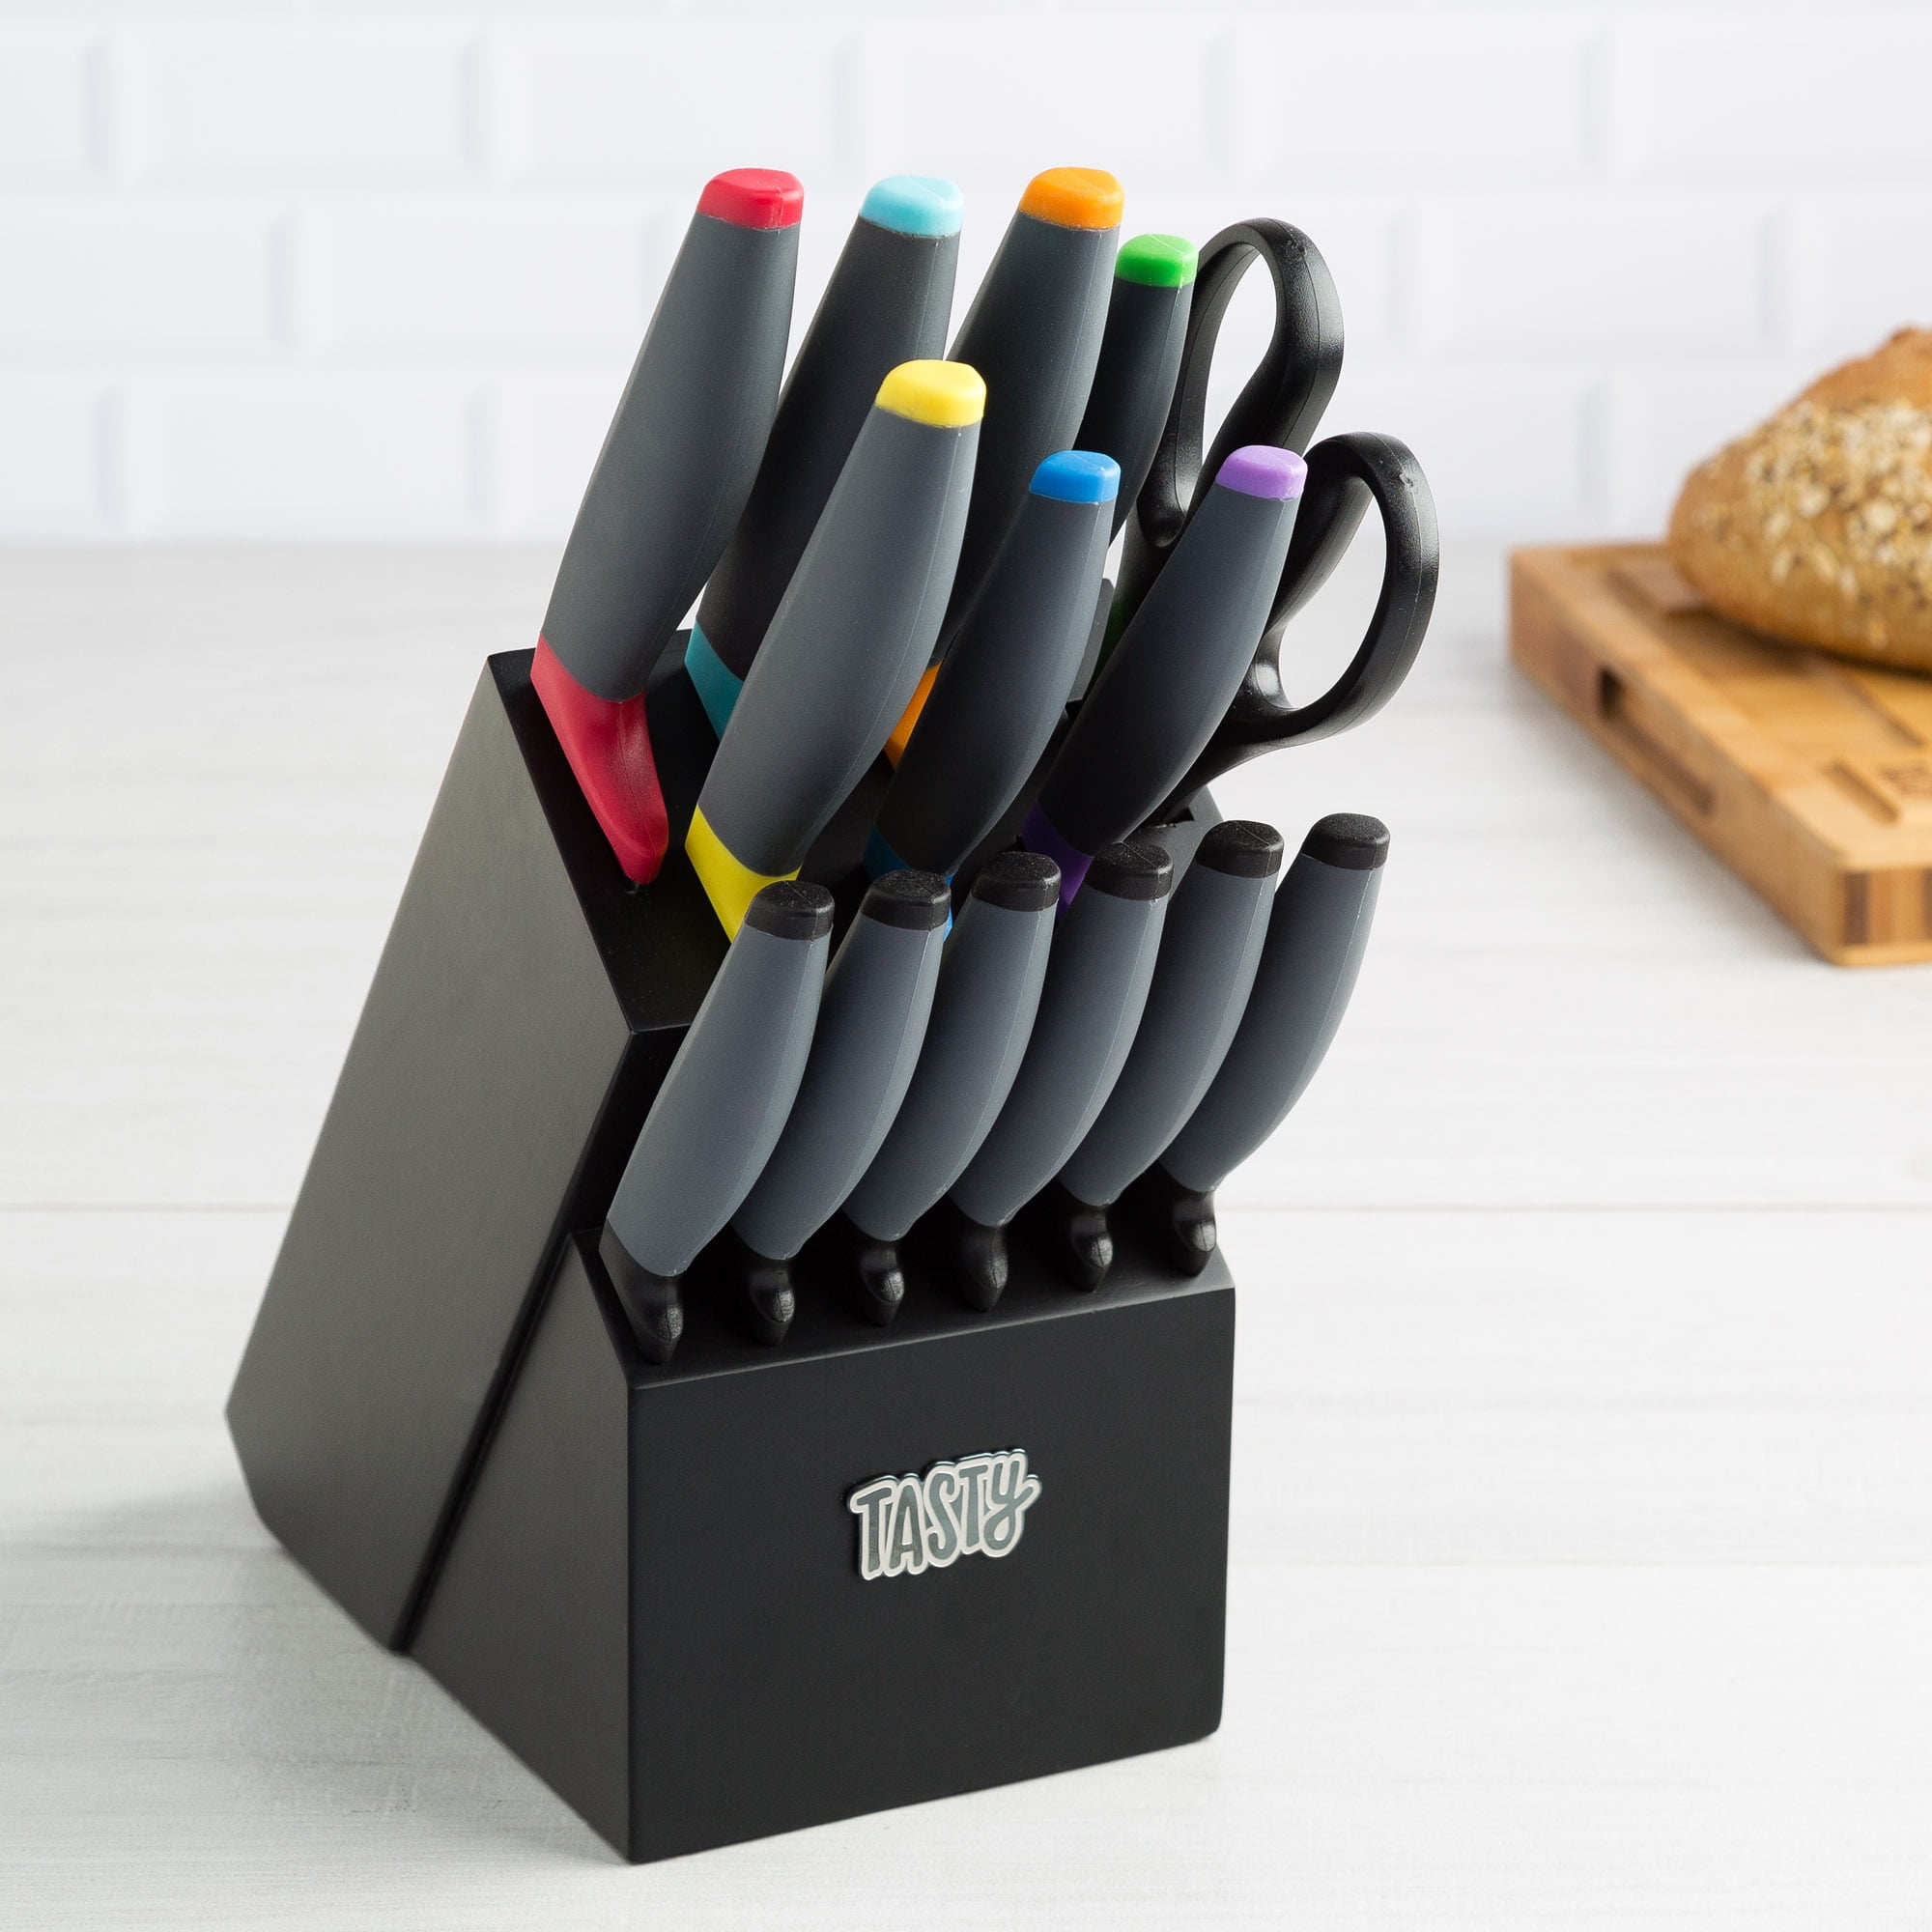 Tasty 6 Piece Prep Knife Block Set, Cutlery Set with Stainless